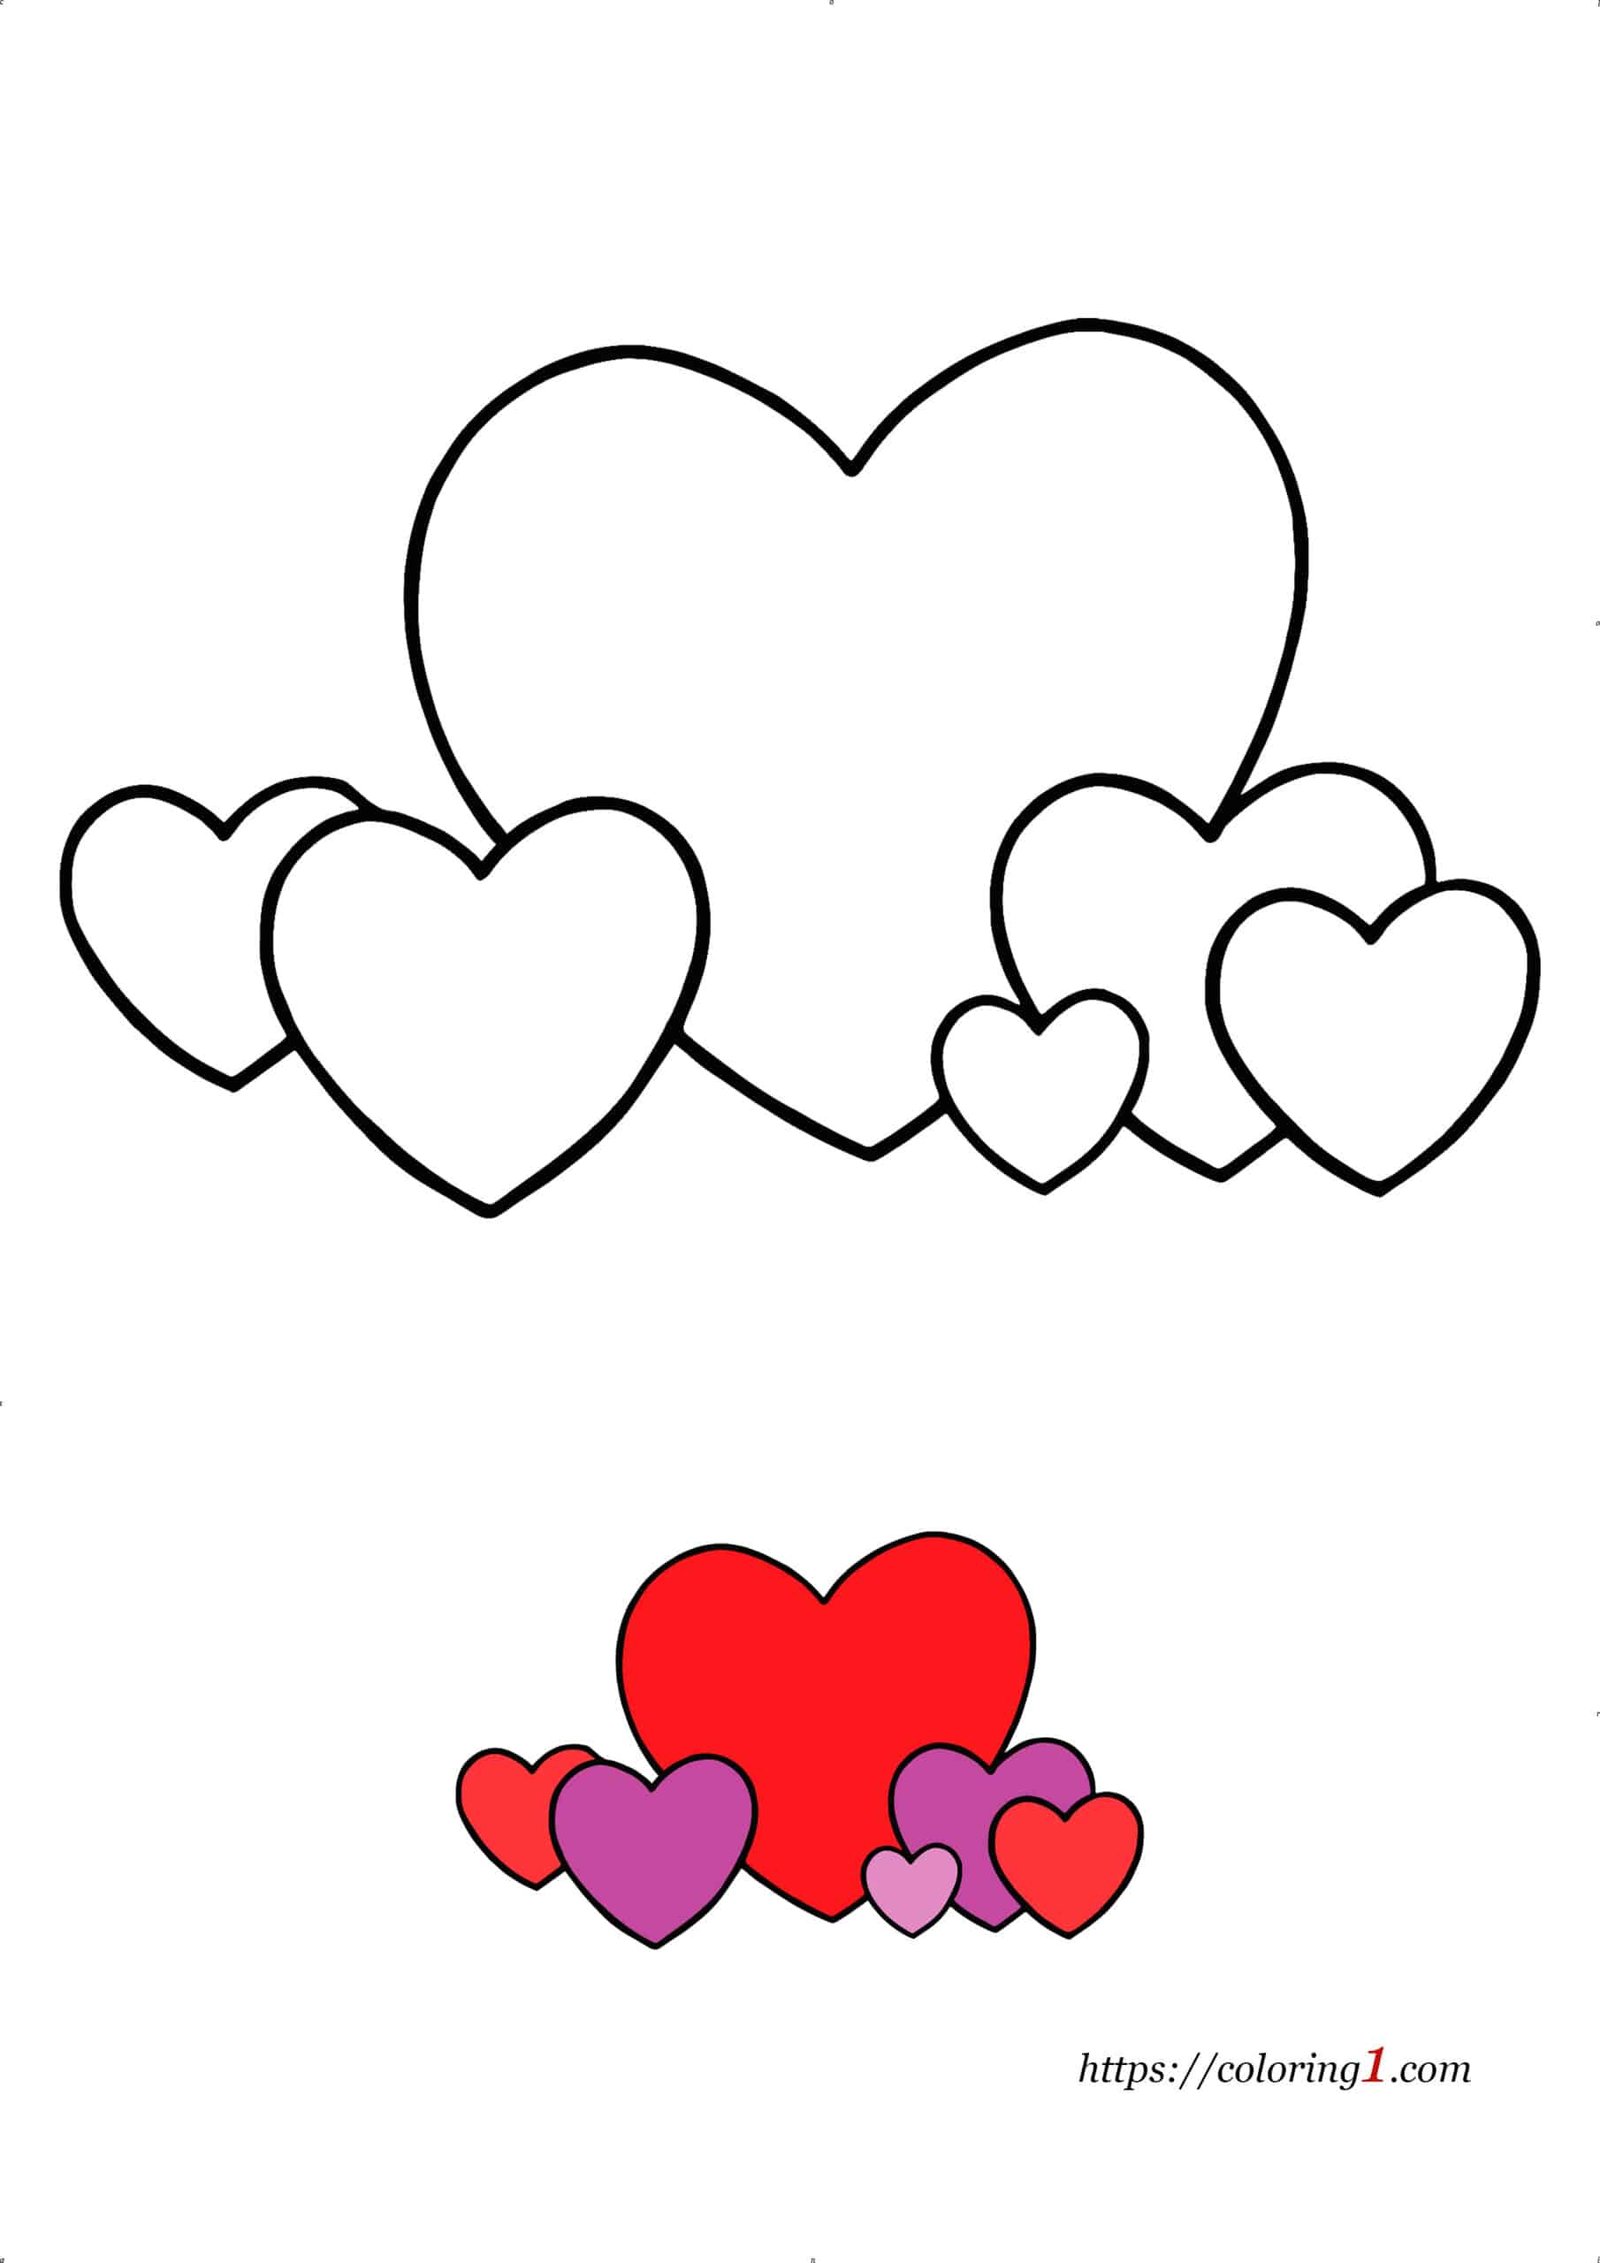 Big Heart With Small Hearts coloring page to print for kids